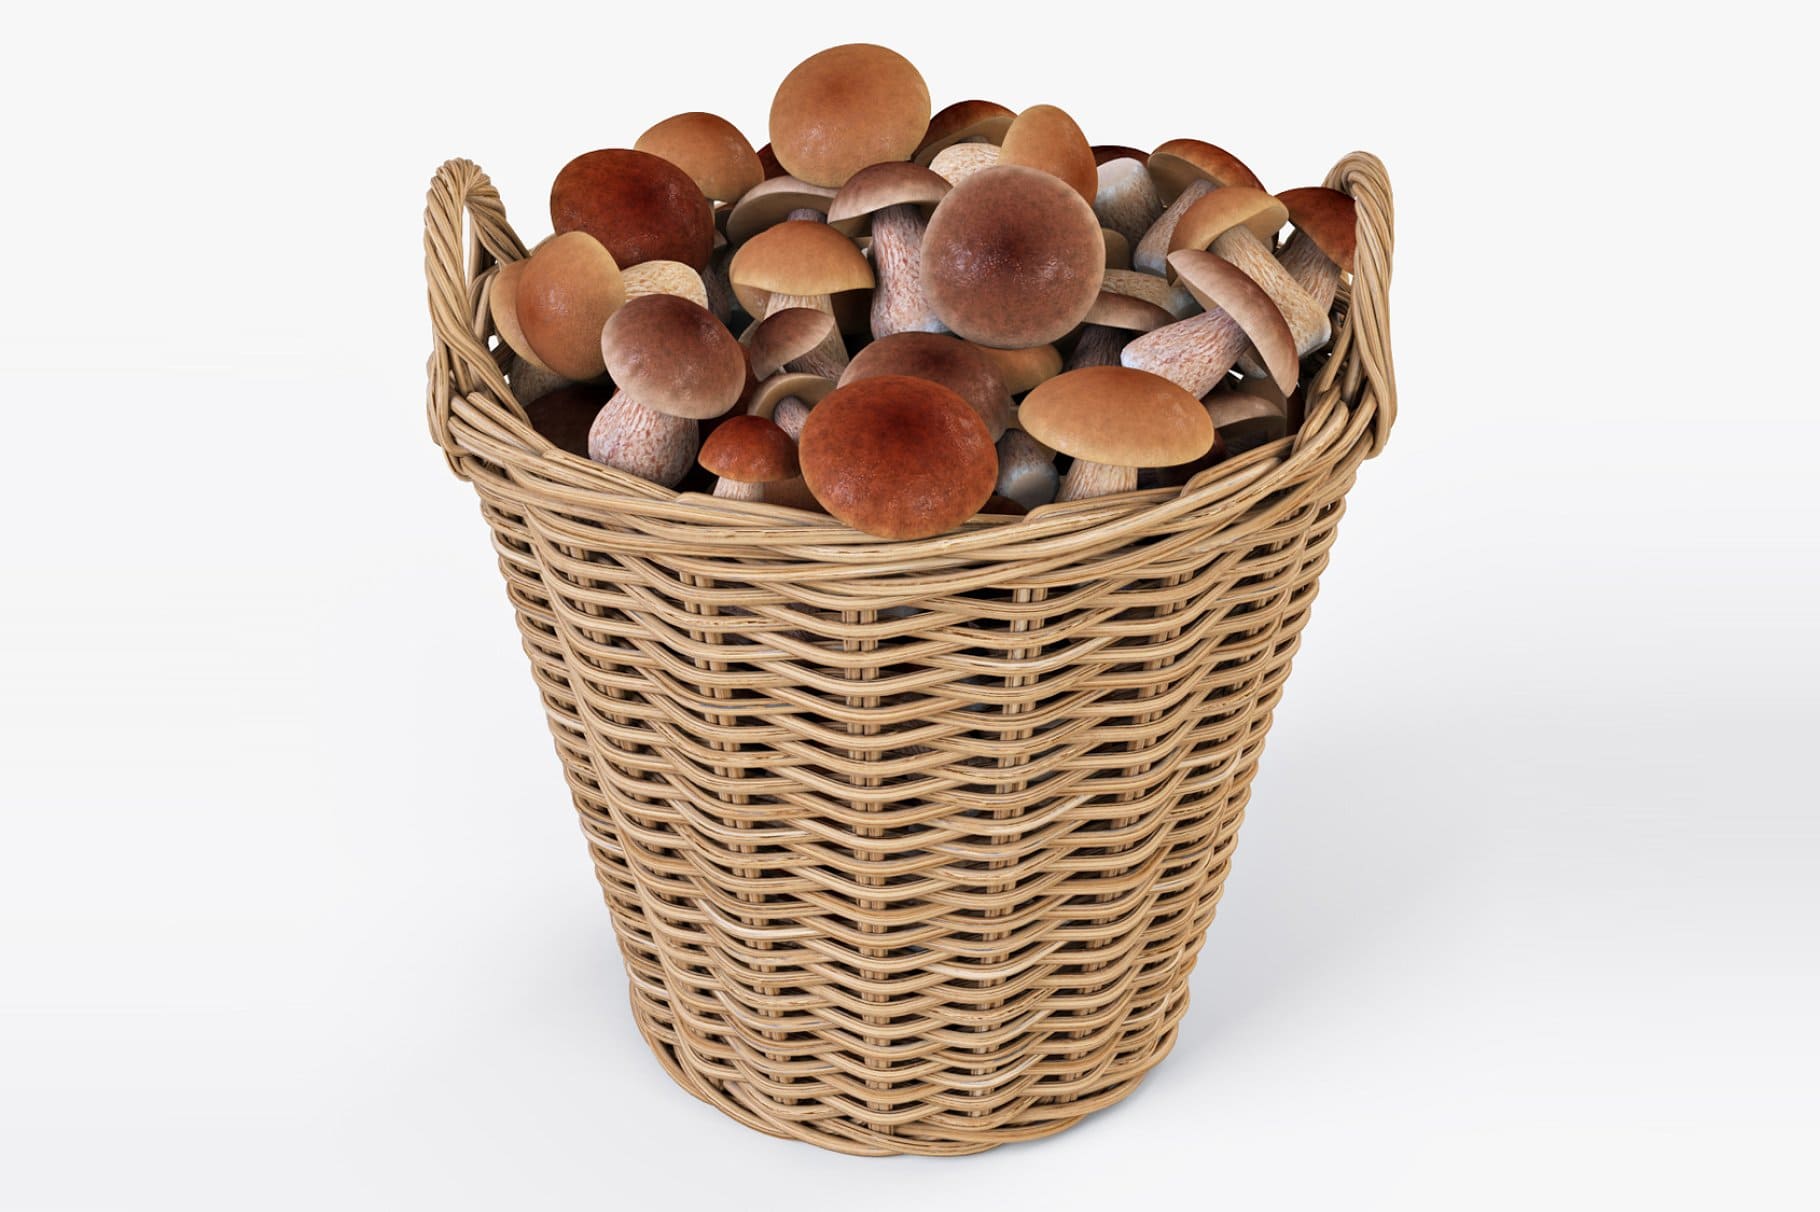 3D model of delicious mushrooms in a deep basket.